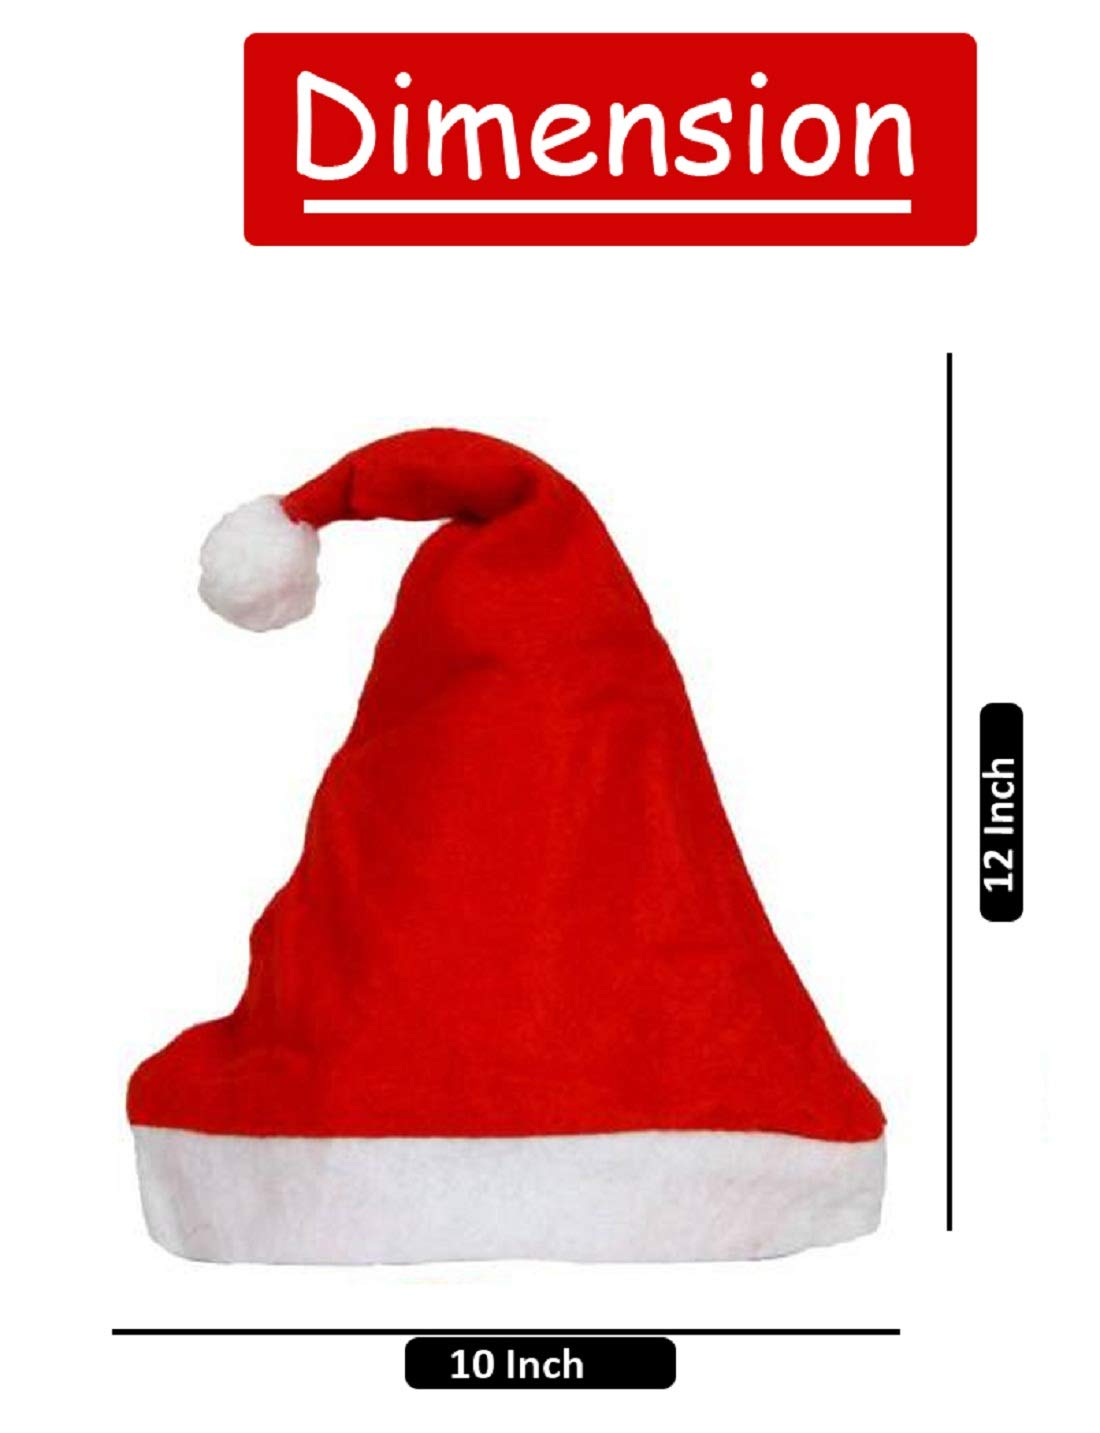 eCraftIndia Red and White Merry Christmas Hats, Santa Claus Caps for kids and Adults - Free Size XMAS Caps, Santa Claus Hats for Christmas, New Year, Festive Holiday Party (Set of 6) 7